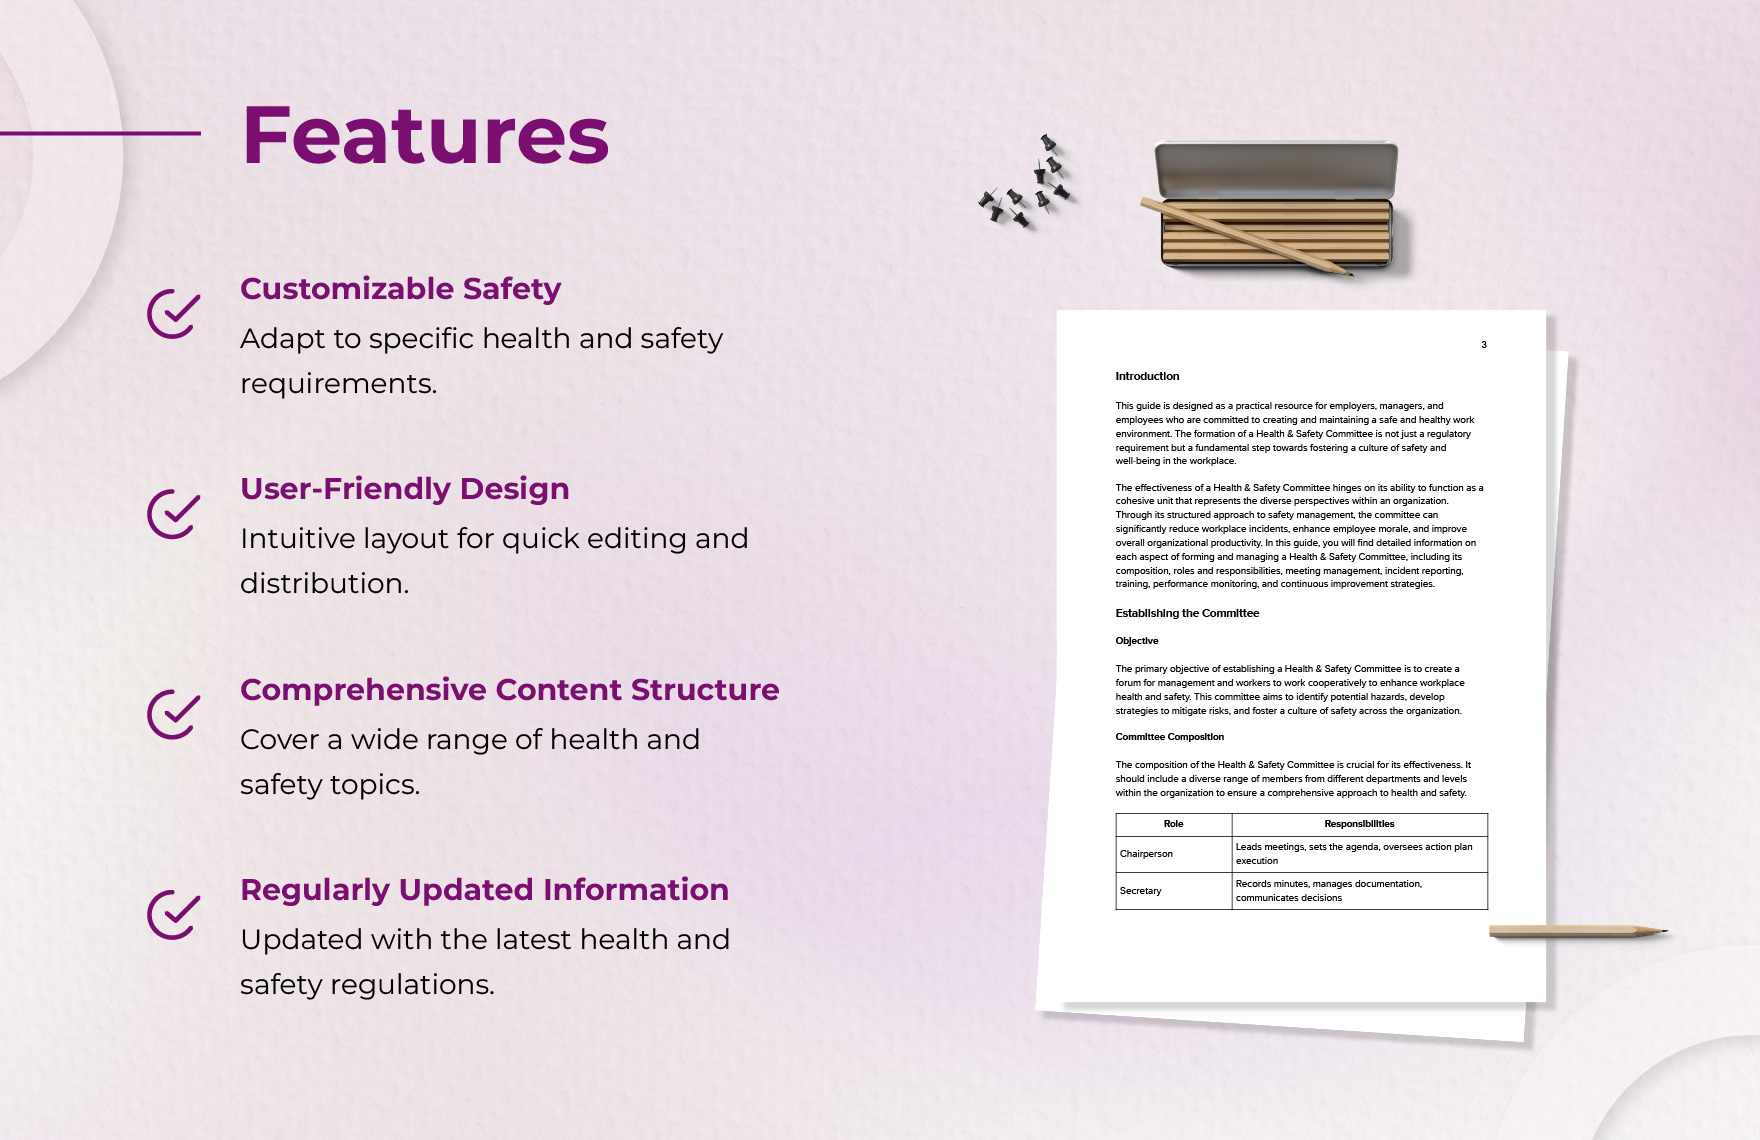 Health & Safety Committee Guide Template